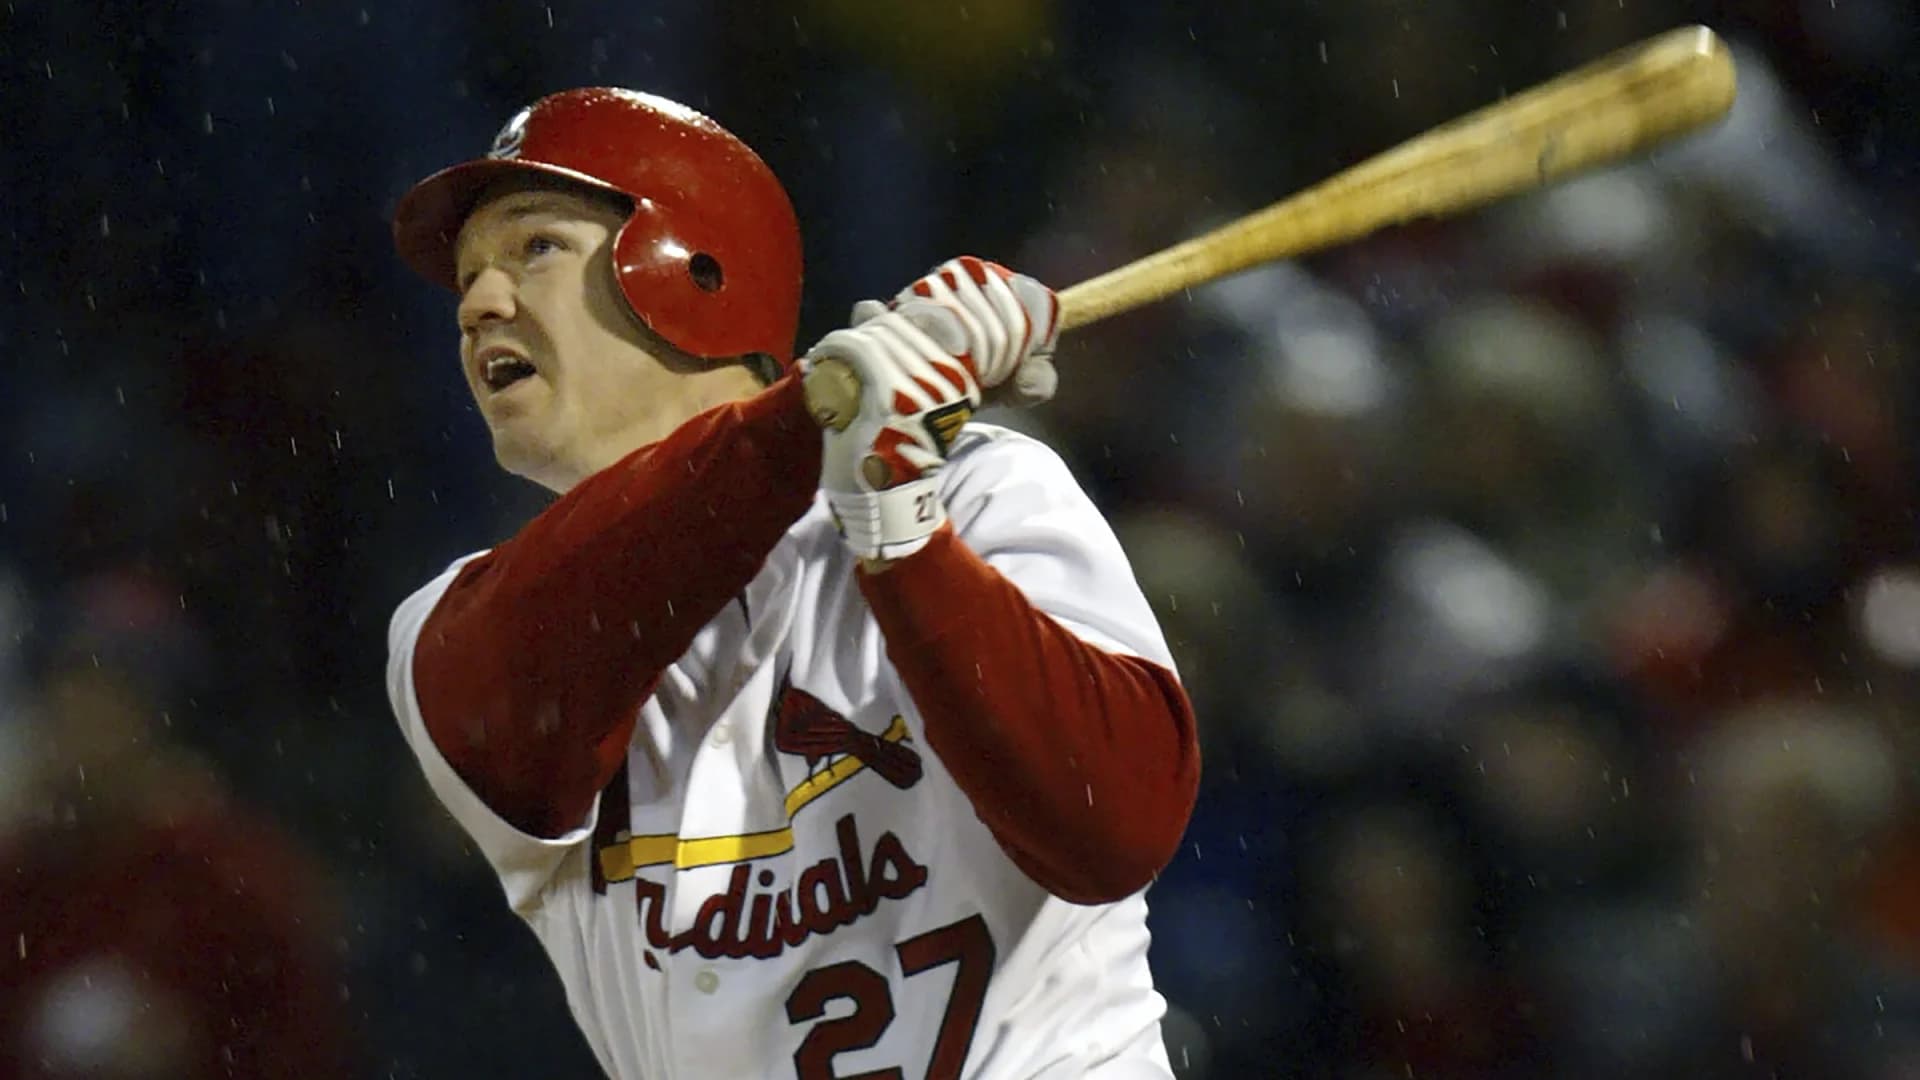 Scott Rolen elected to baseball’s Hall of Fame